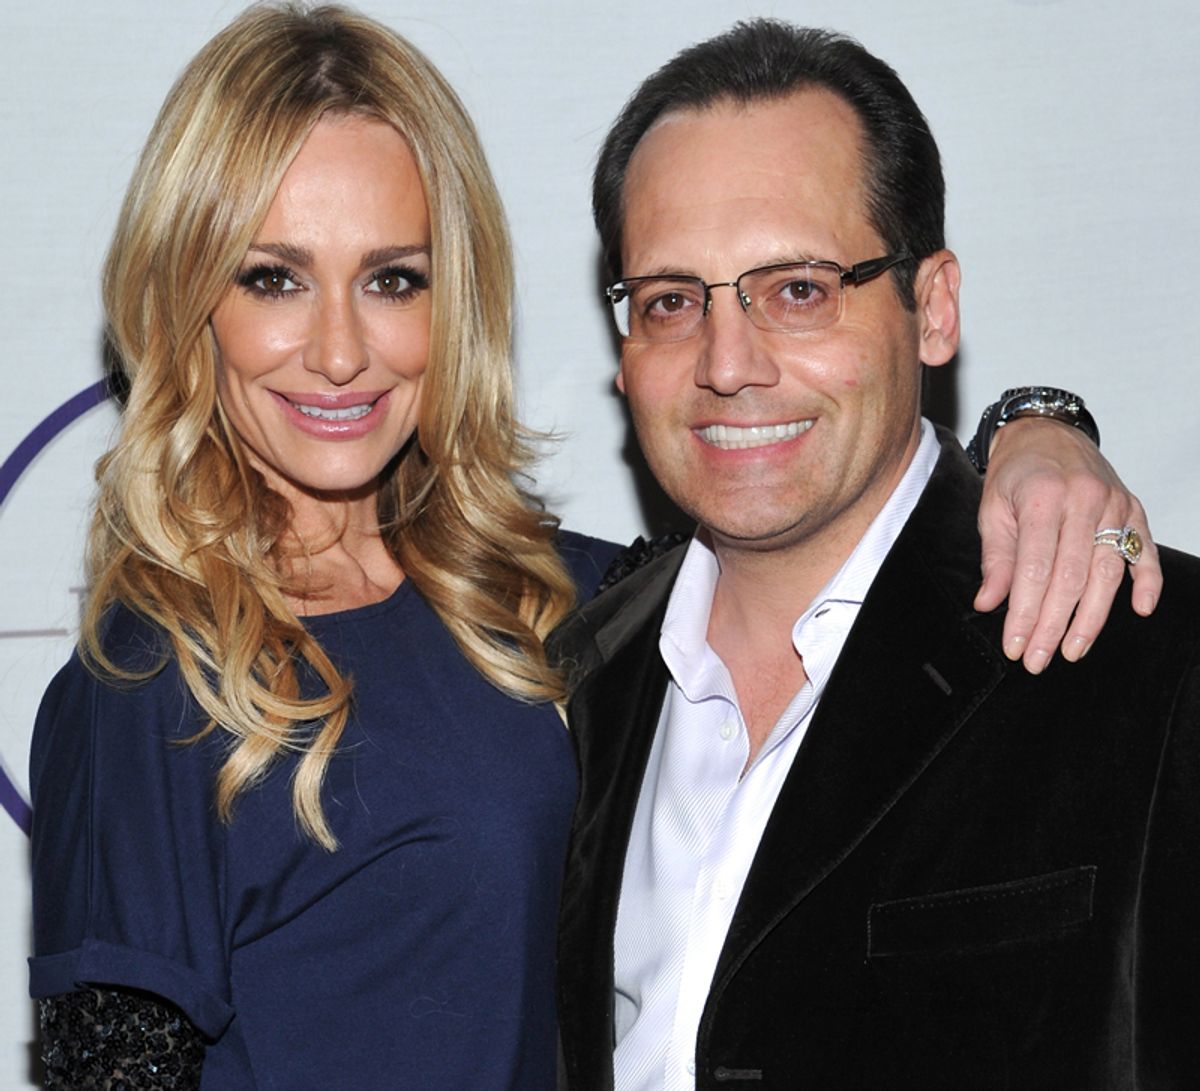 FILE - In this Feb. 5,2011 file photo, television personality Taylor Armstrong, left, and husband Russell Armstrong attend a Super Bowl party in Dallas, Texas. Russell Armstrong, the estranged husband of "Real Housewives of Beverly Hills" star Taylor Armstrong, has been found dead in his Los Angeles home. (AP Photo/Evan Agostini,File) (Evan Agostini)